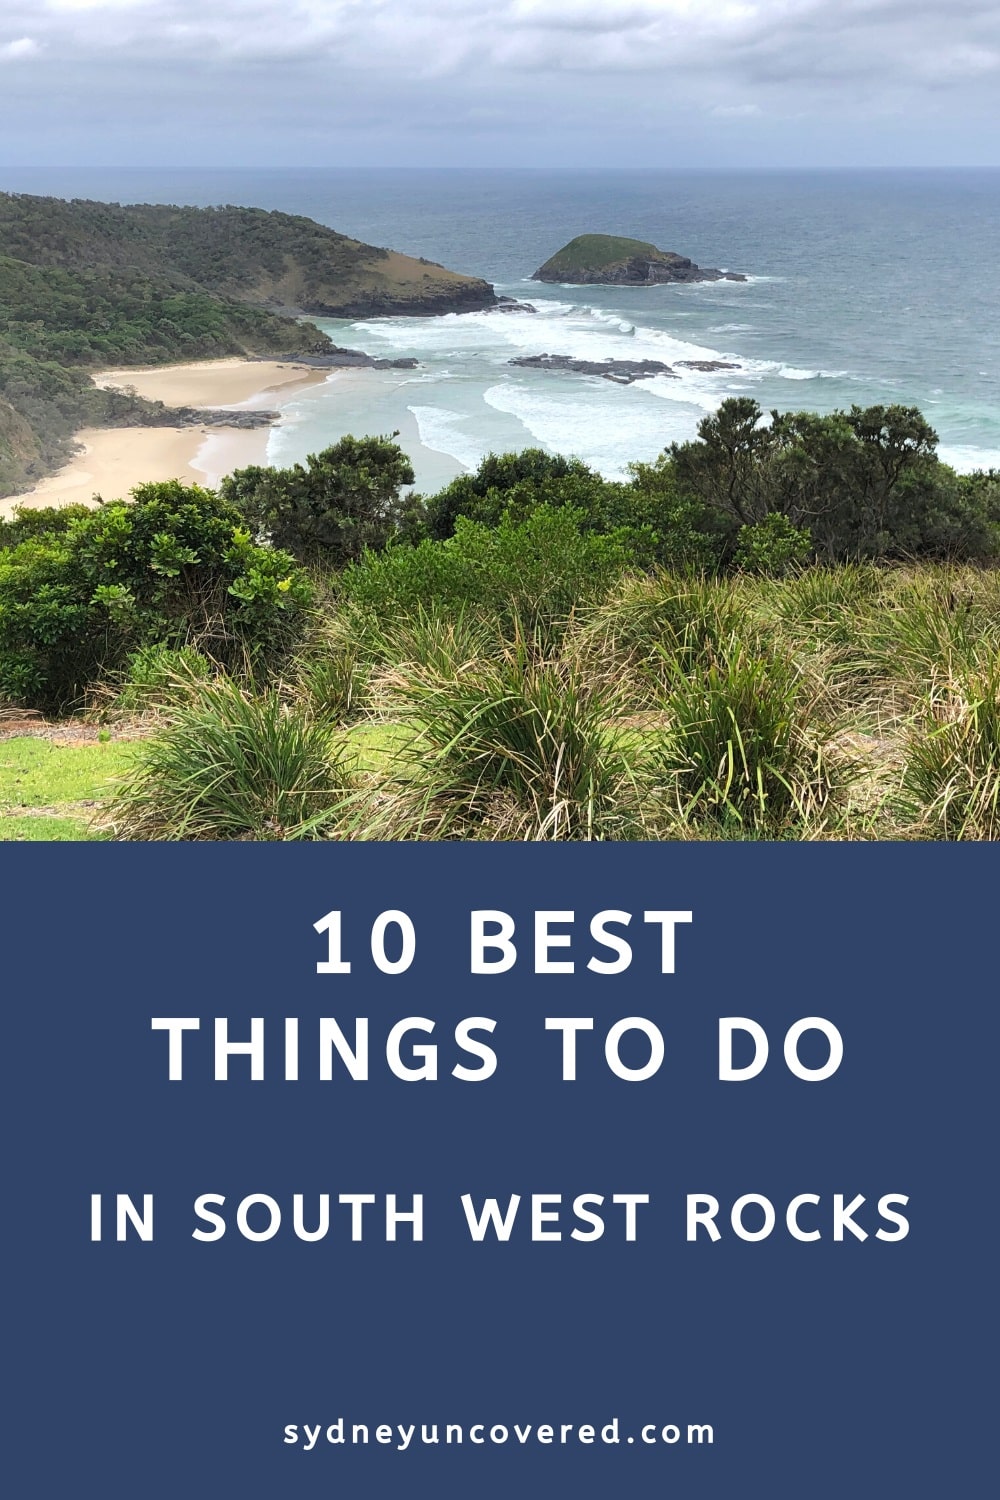 10 Best things to do in South West Rocks